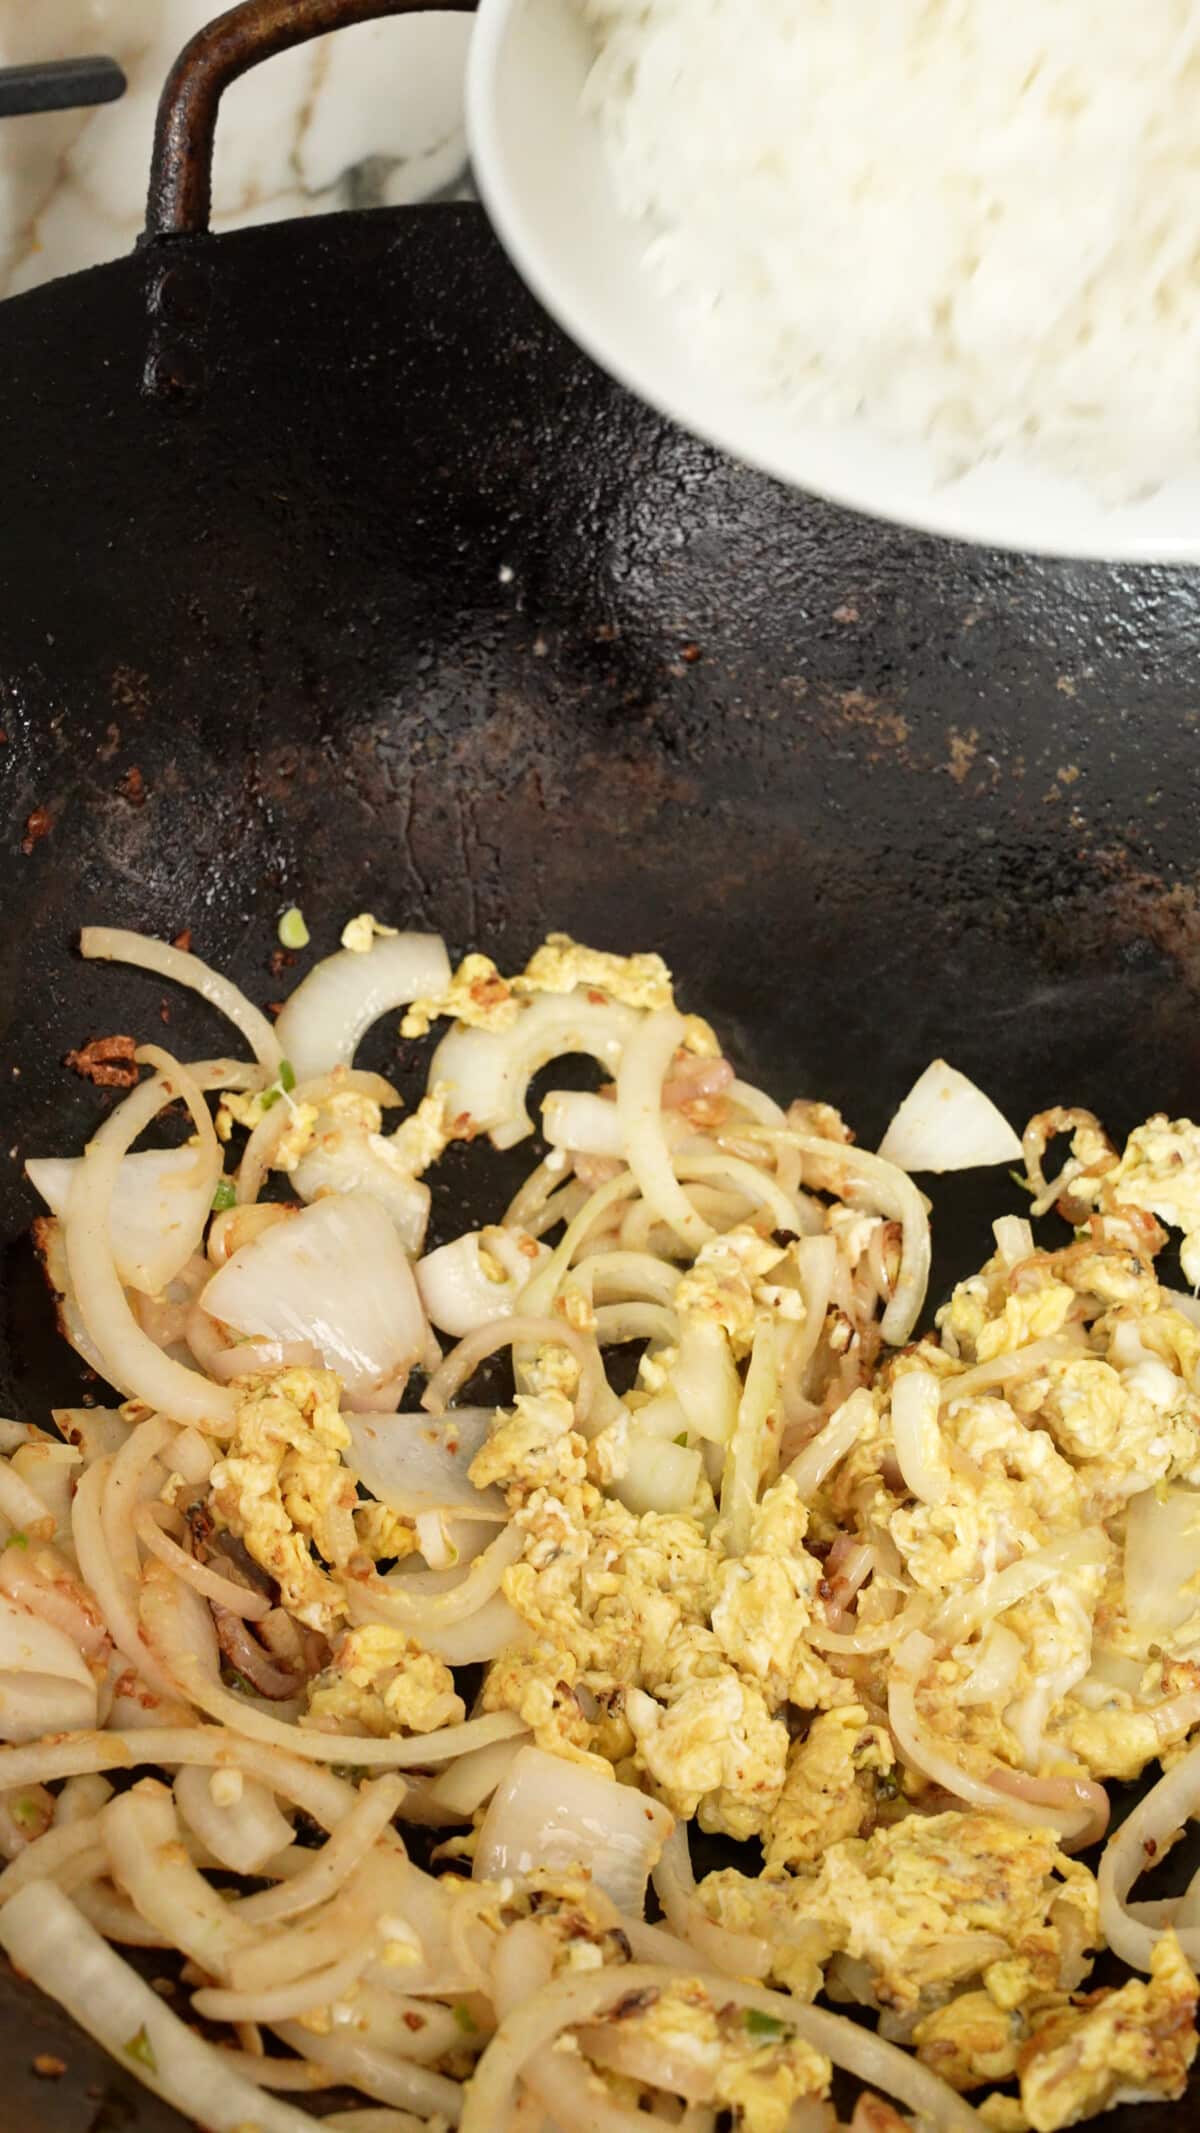 Eggs scrambled in a wok with onions, shallots, and thai chili and garlic paste.